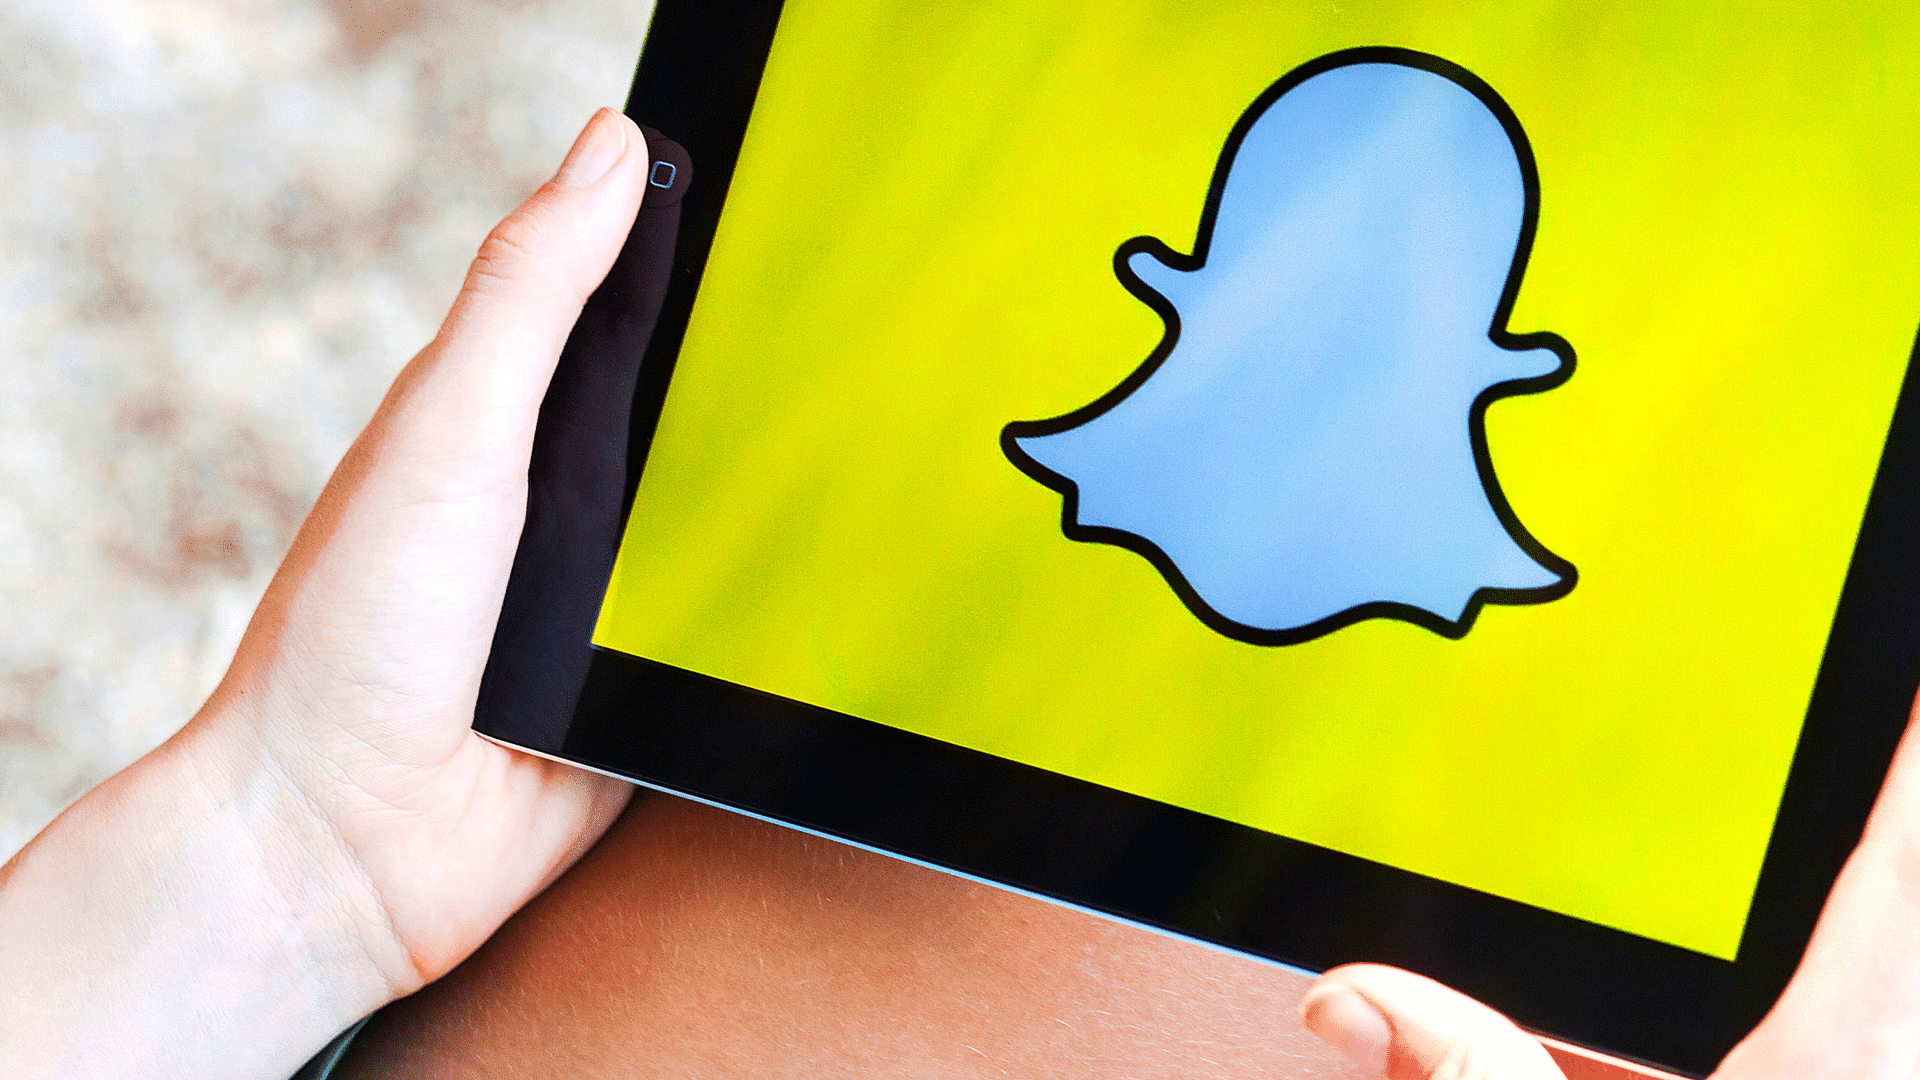 A lot of technology and effort goes into making Snapchat what it is!